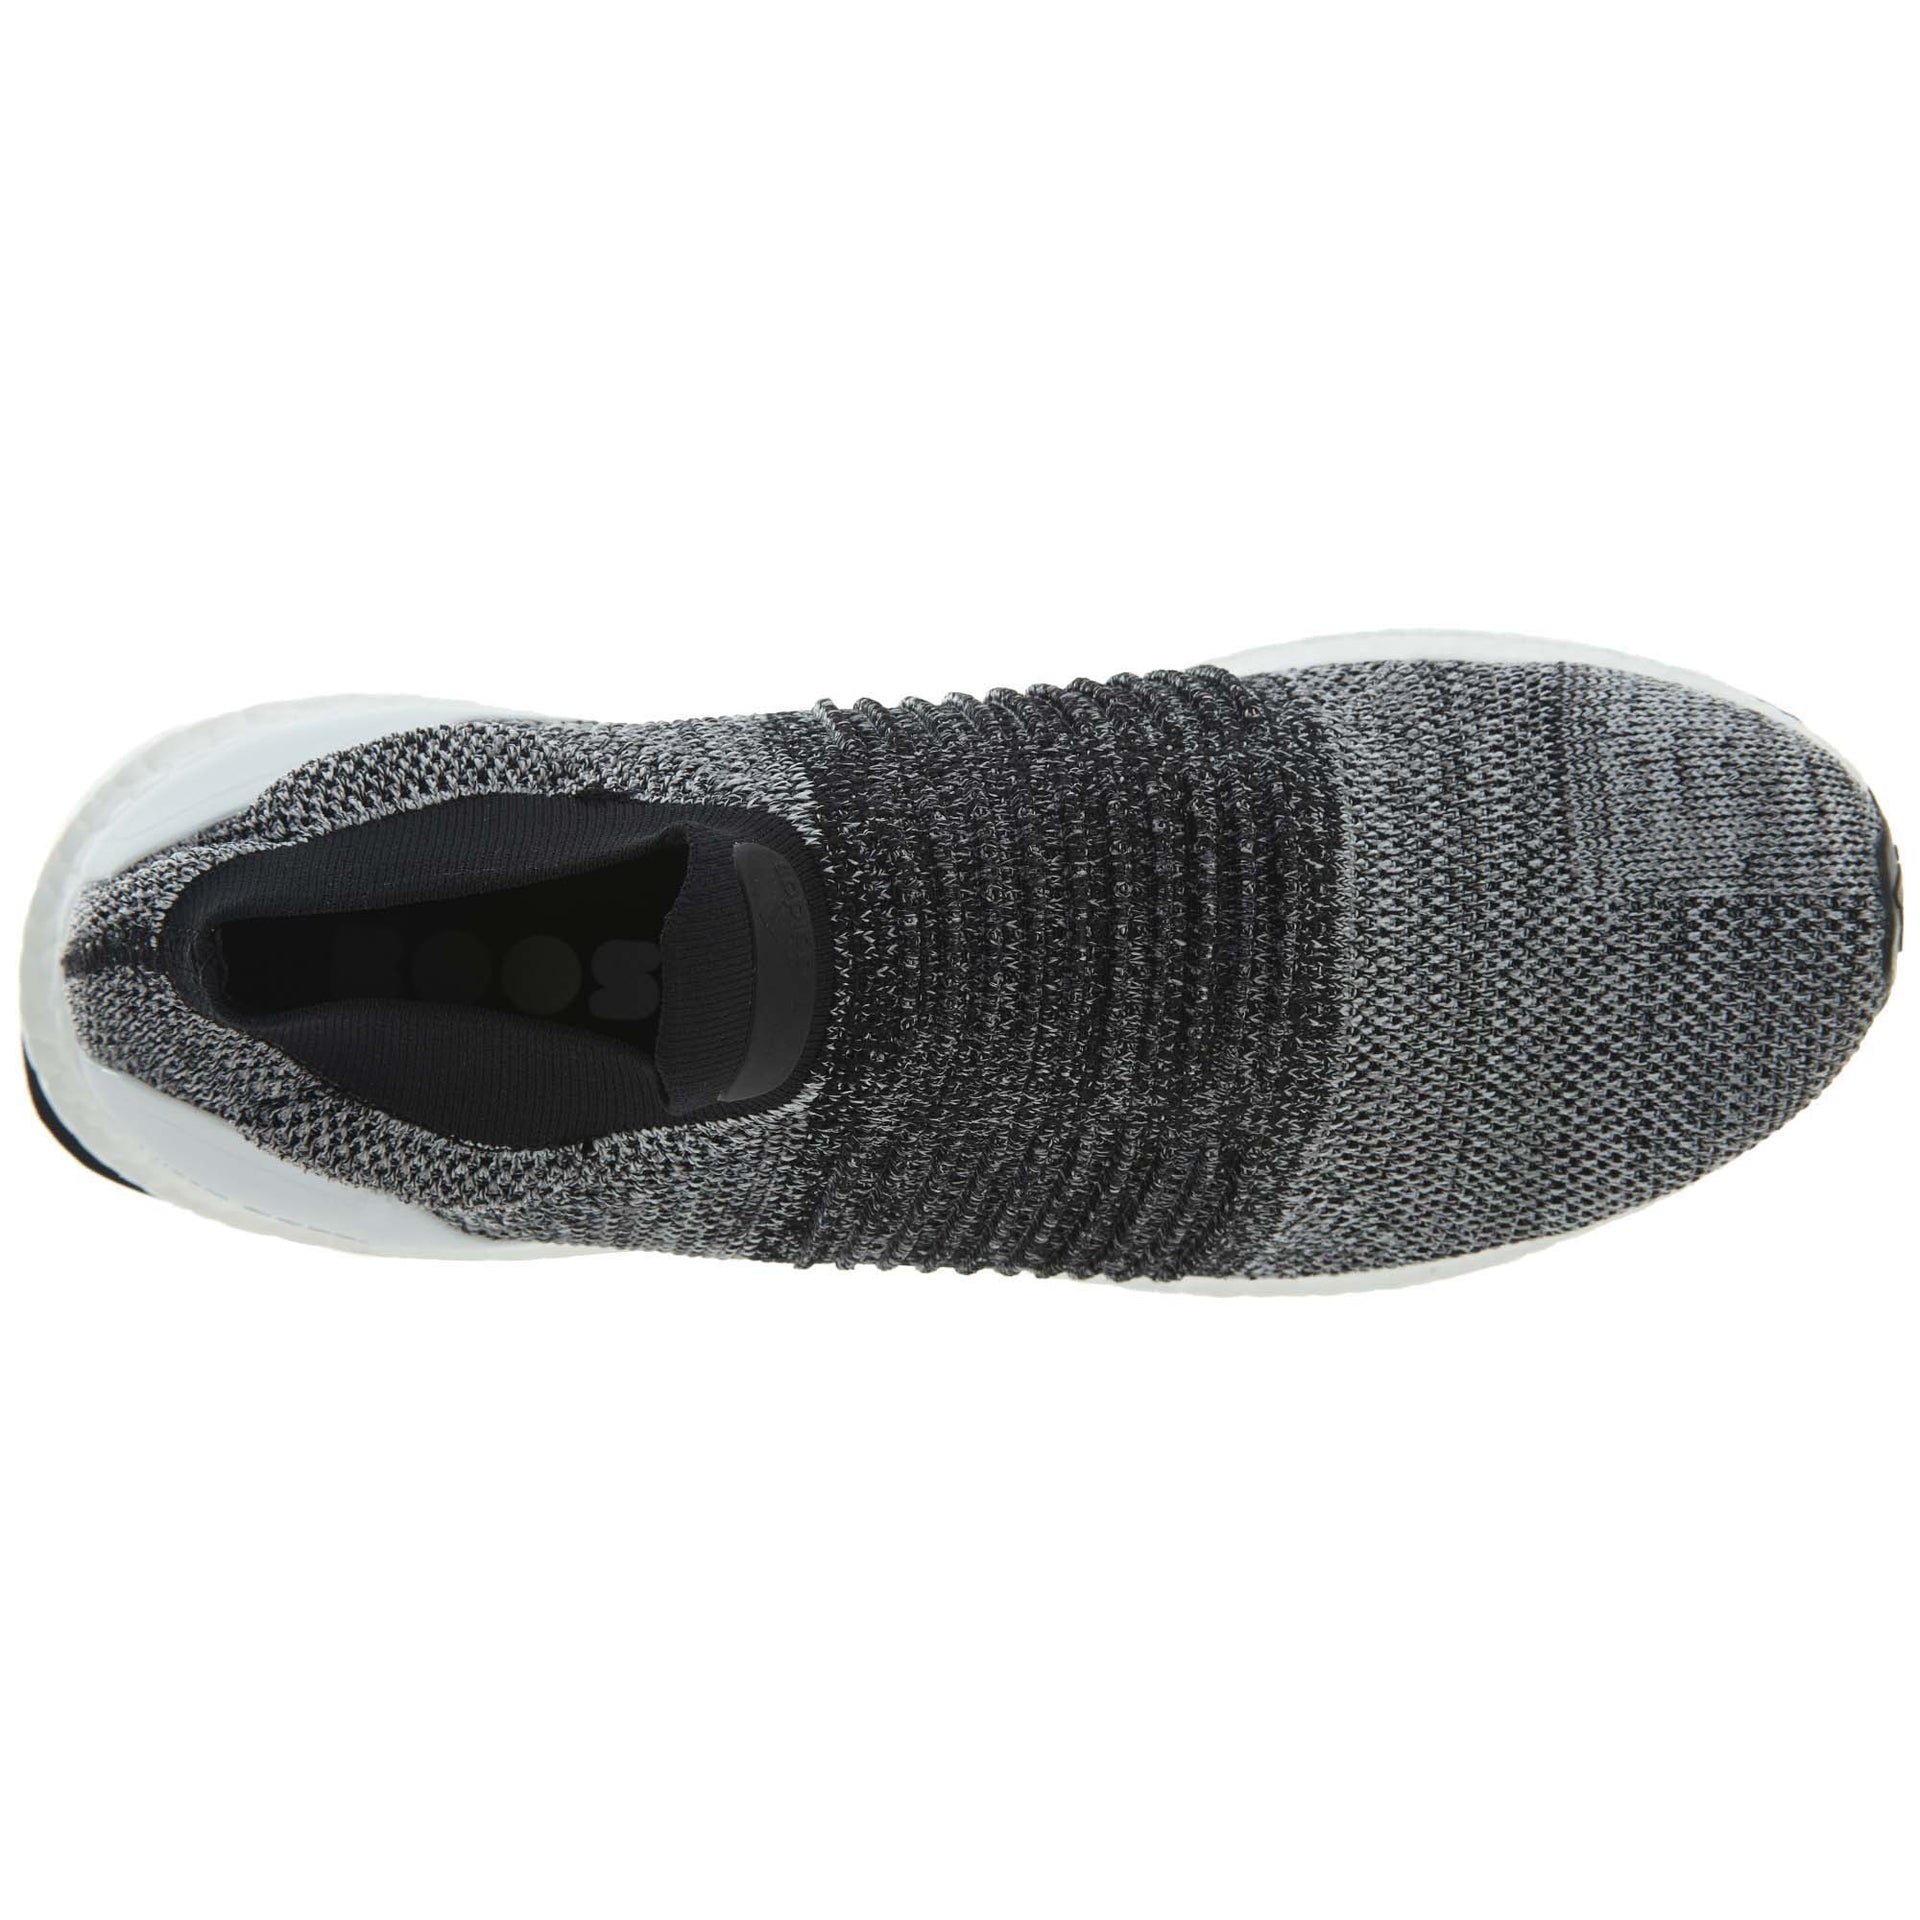 Adidas Ultra Boost Laceless Mens Style : Bb6141